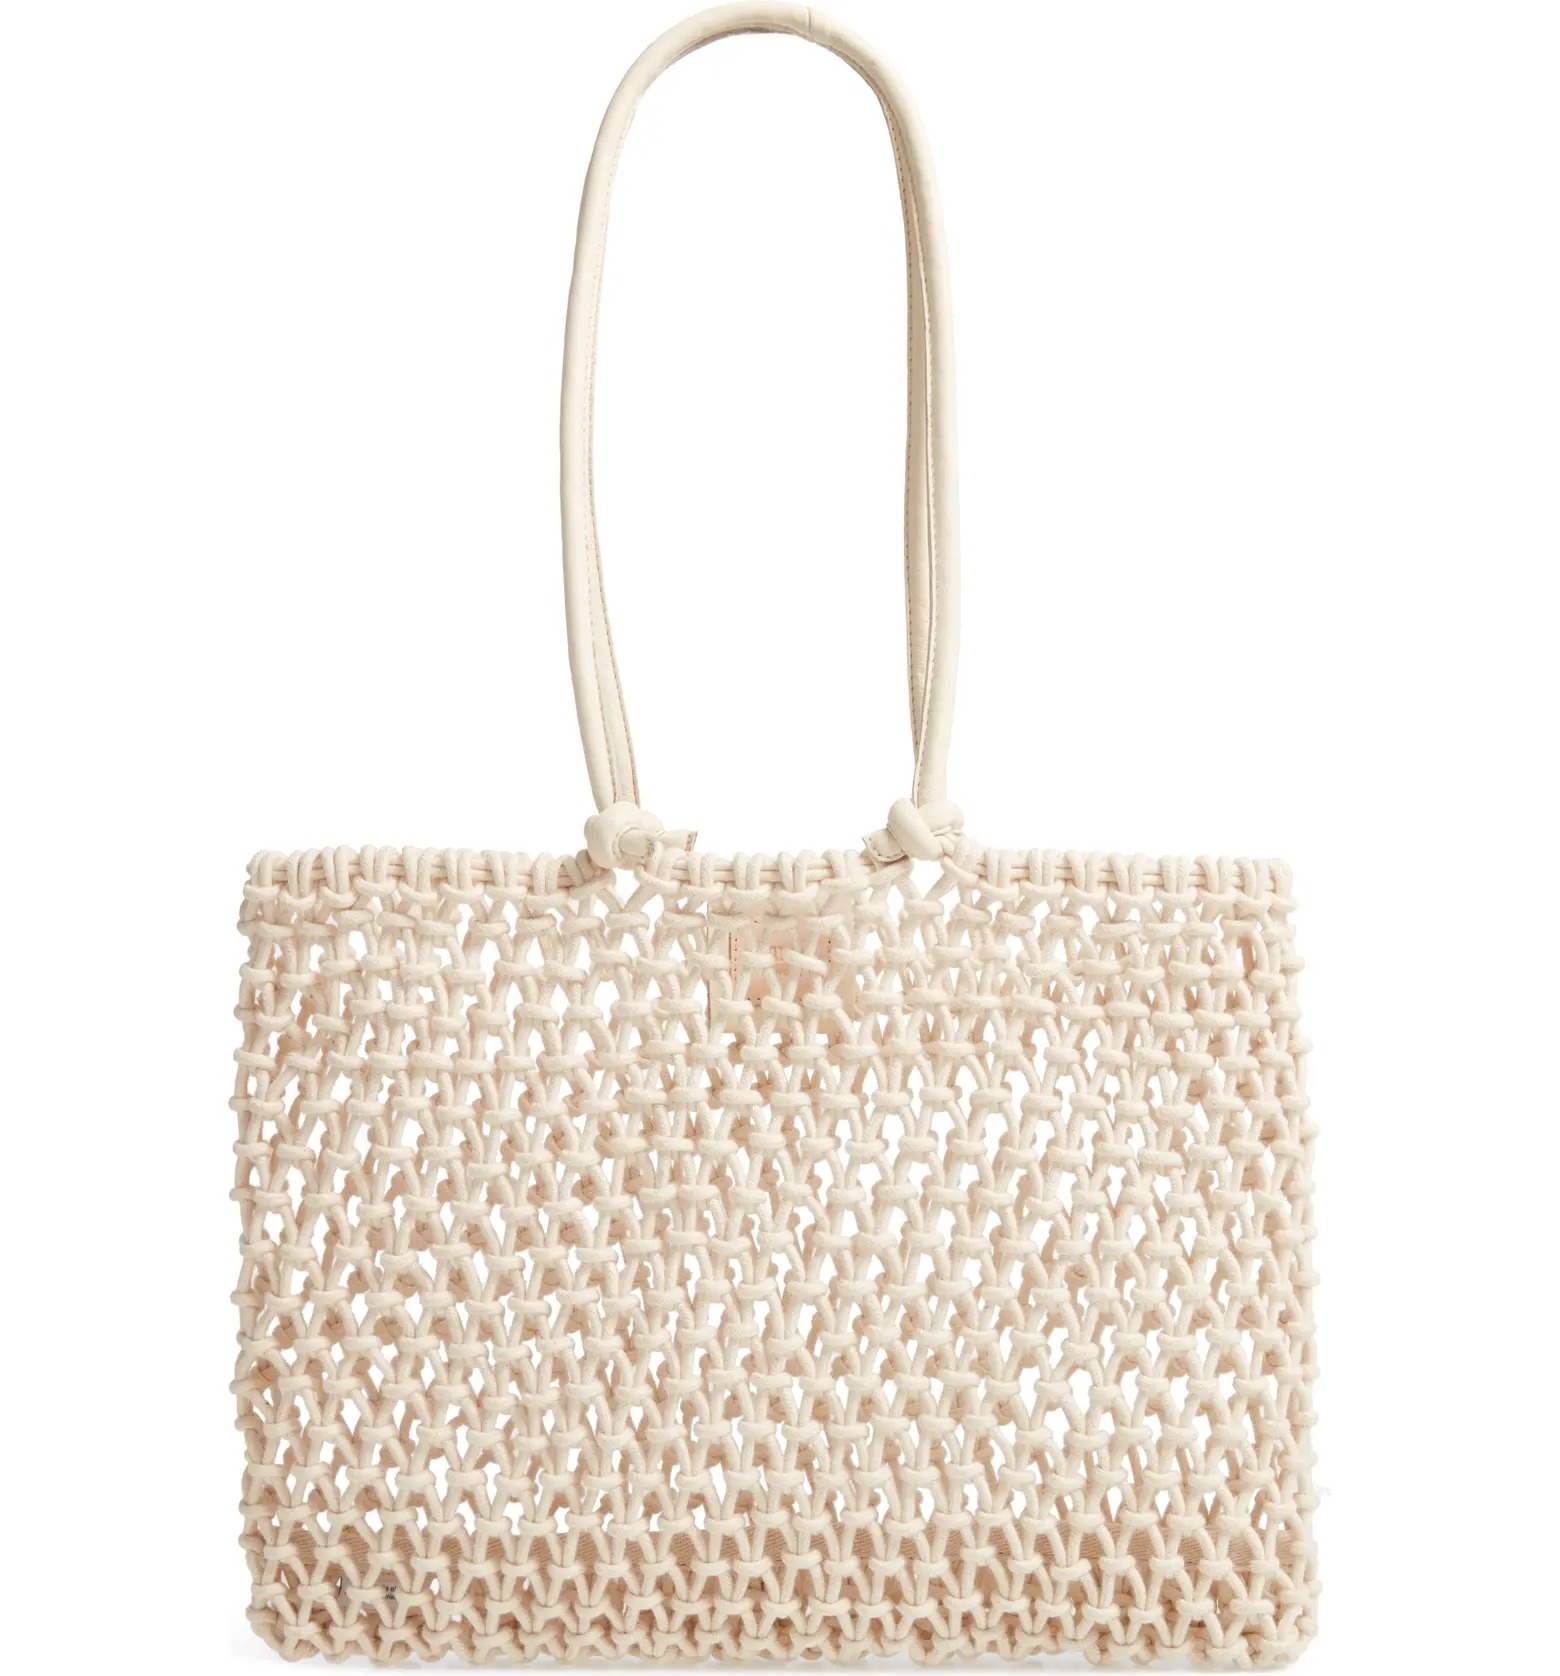 The 21 Best Beach Bags Are A Quintessential Summer Staple